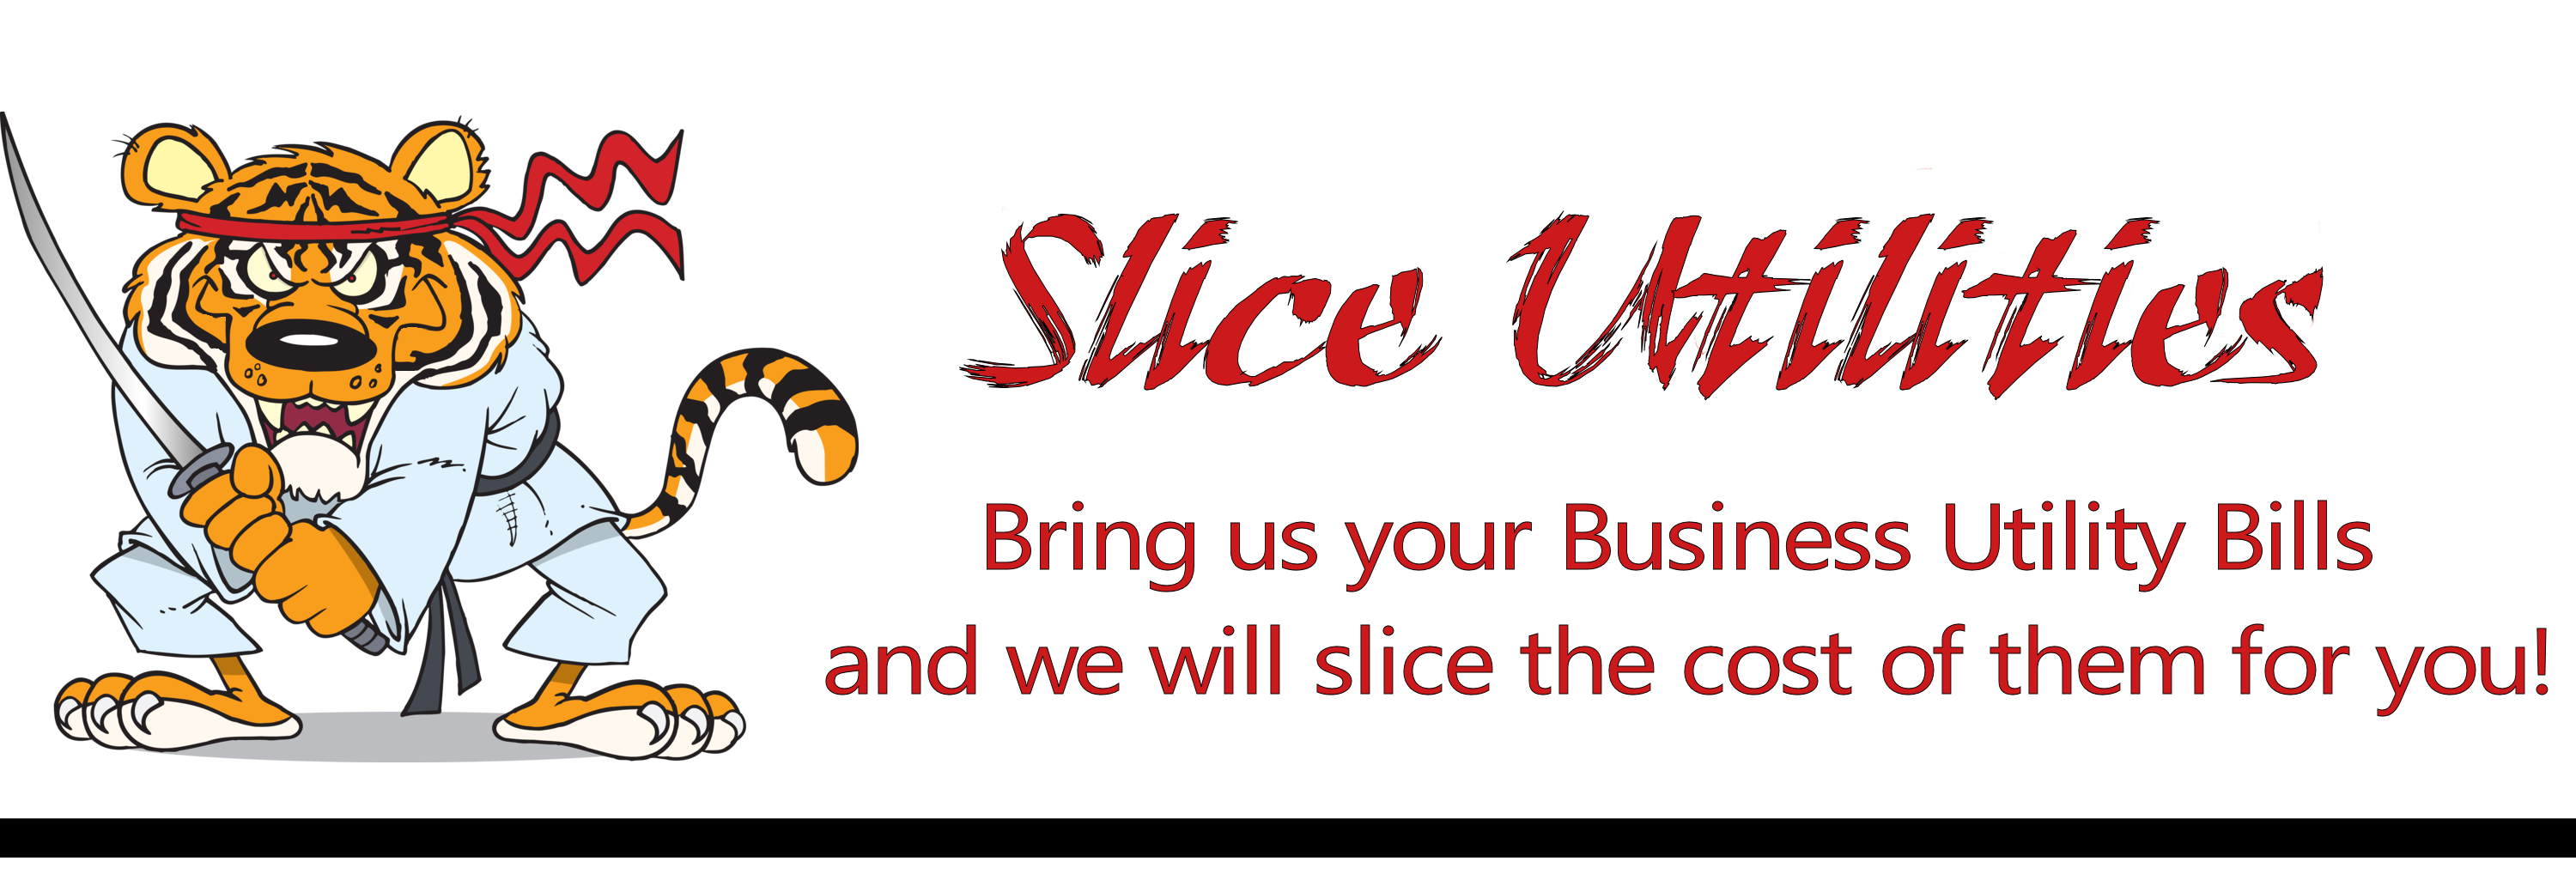 Silce Utilities - Bring us your busiiness Utility Bills and we will slice the cost of them for you!